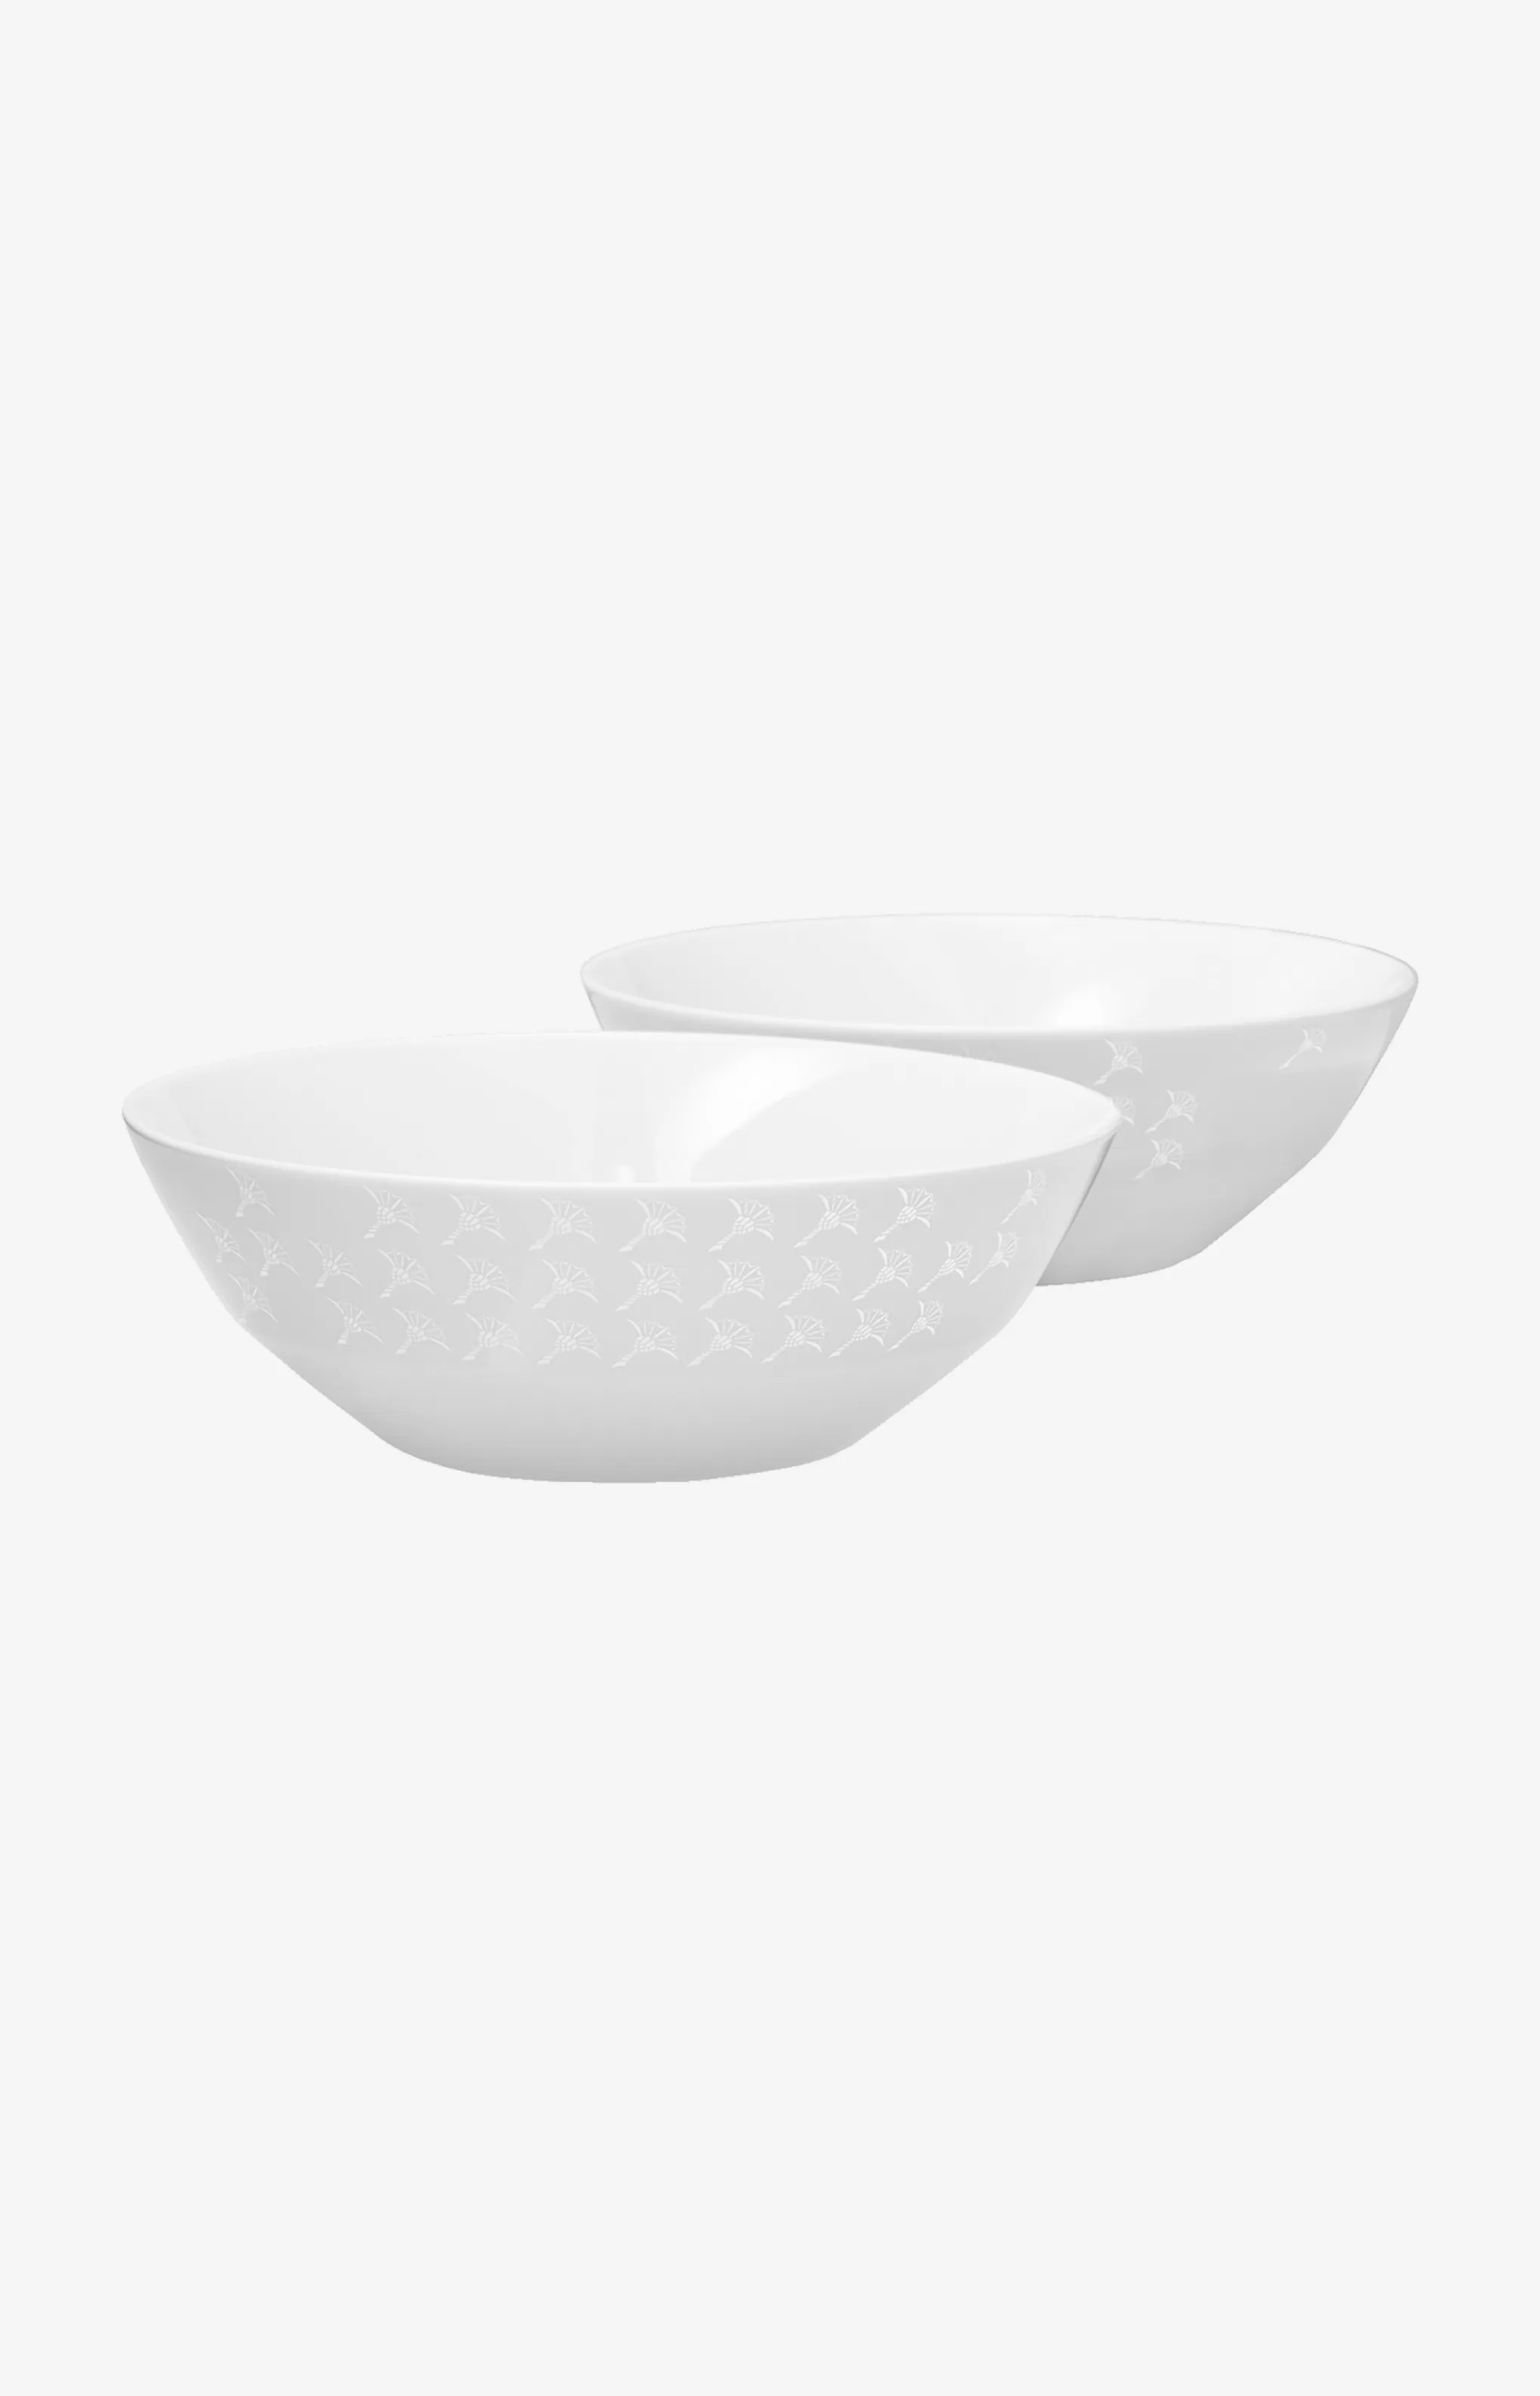 Tableware | Discover Everything*JOOP Tableware | Discover Everything Faded Cornflower Bowl 16 cm - Set of 2 in